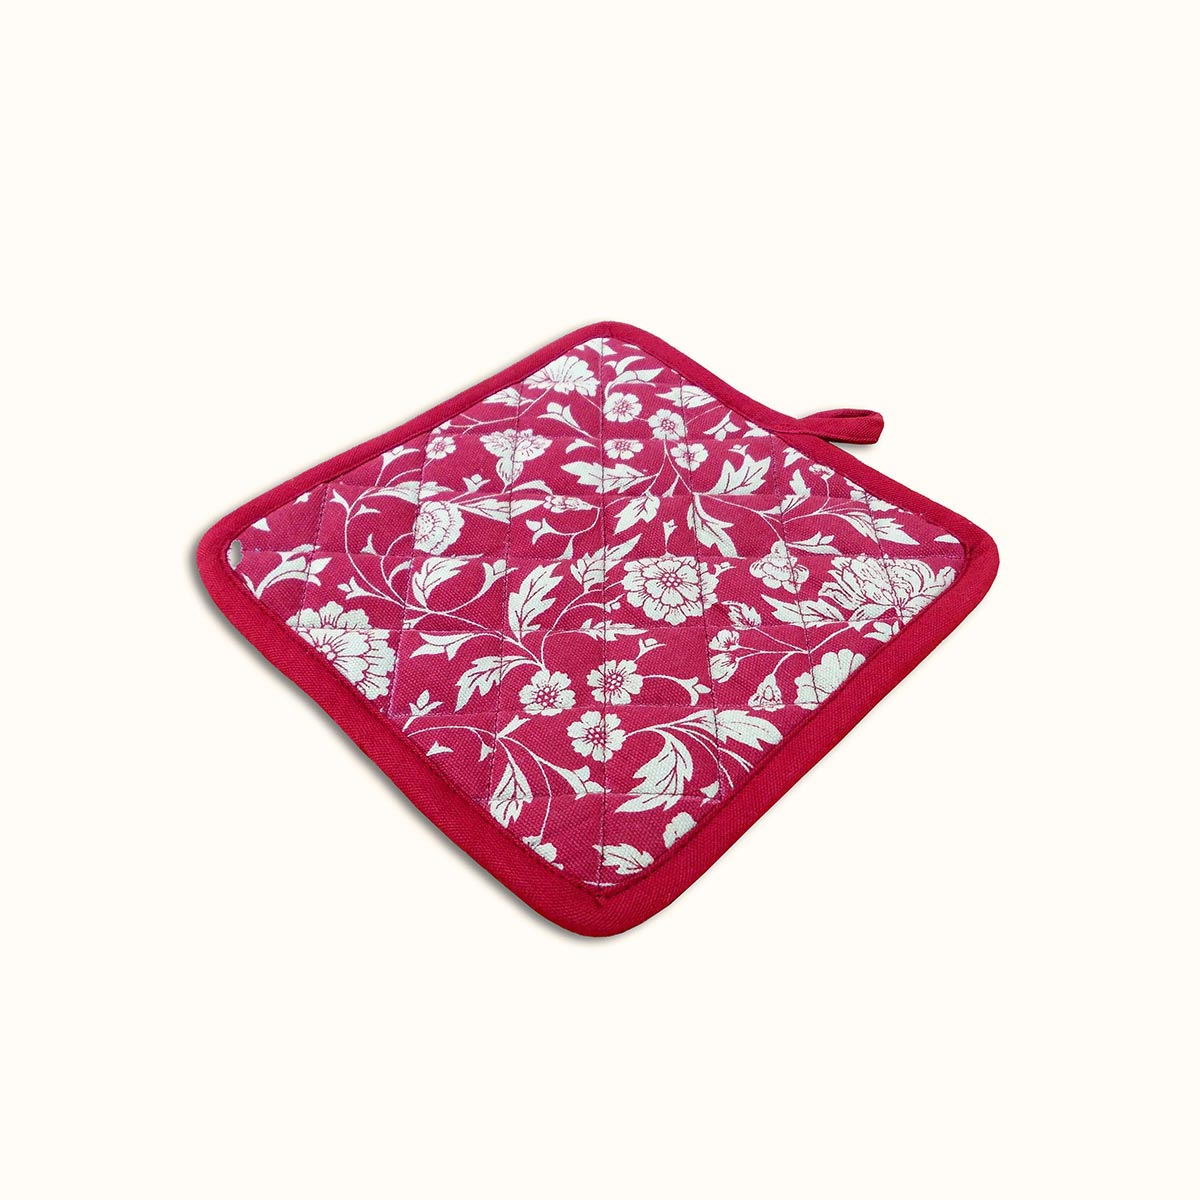 Kalamkari Maroon quilted oven mitt, quilted potholder, kitchen accessory, pure cotton